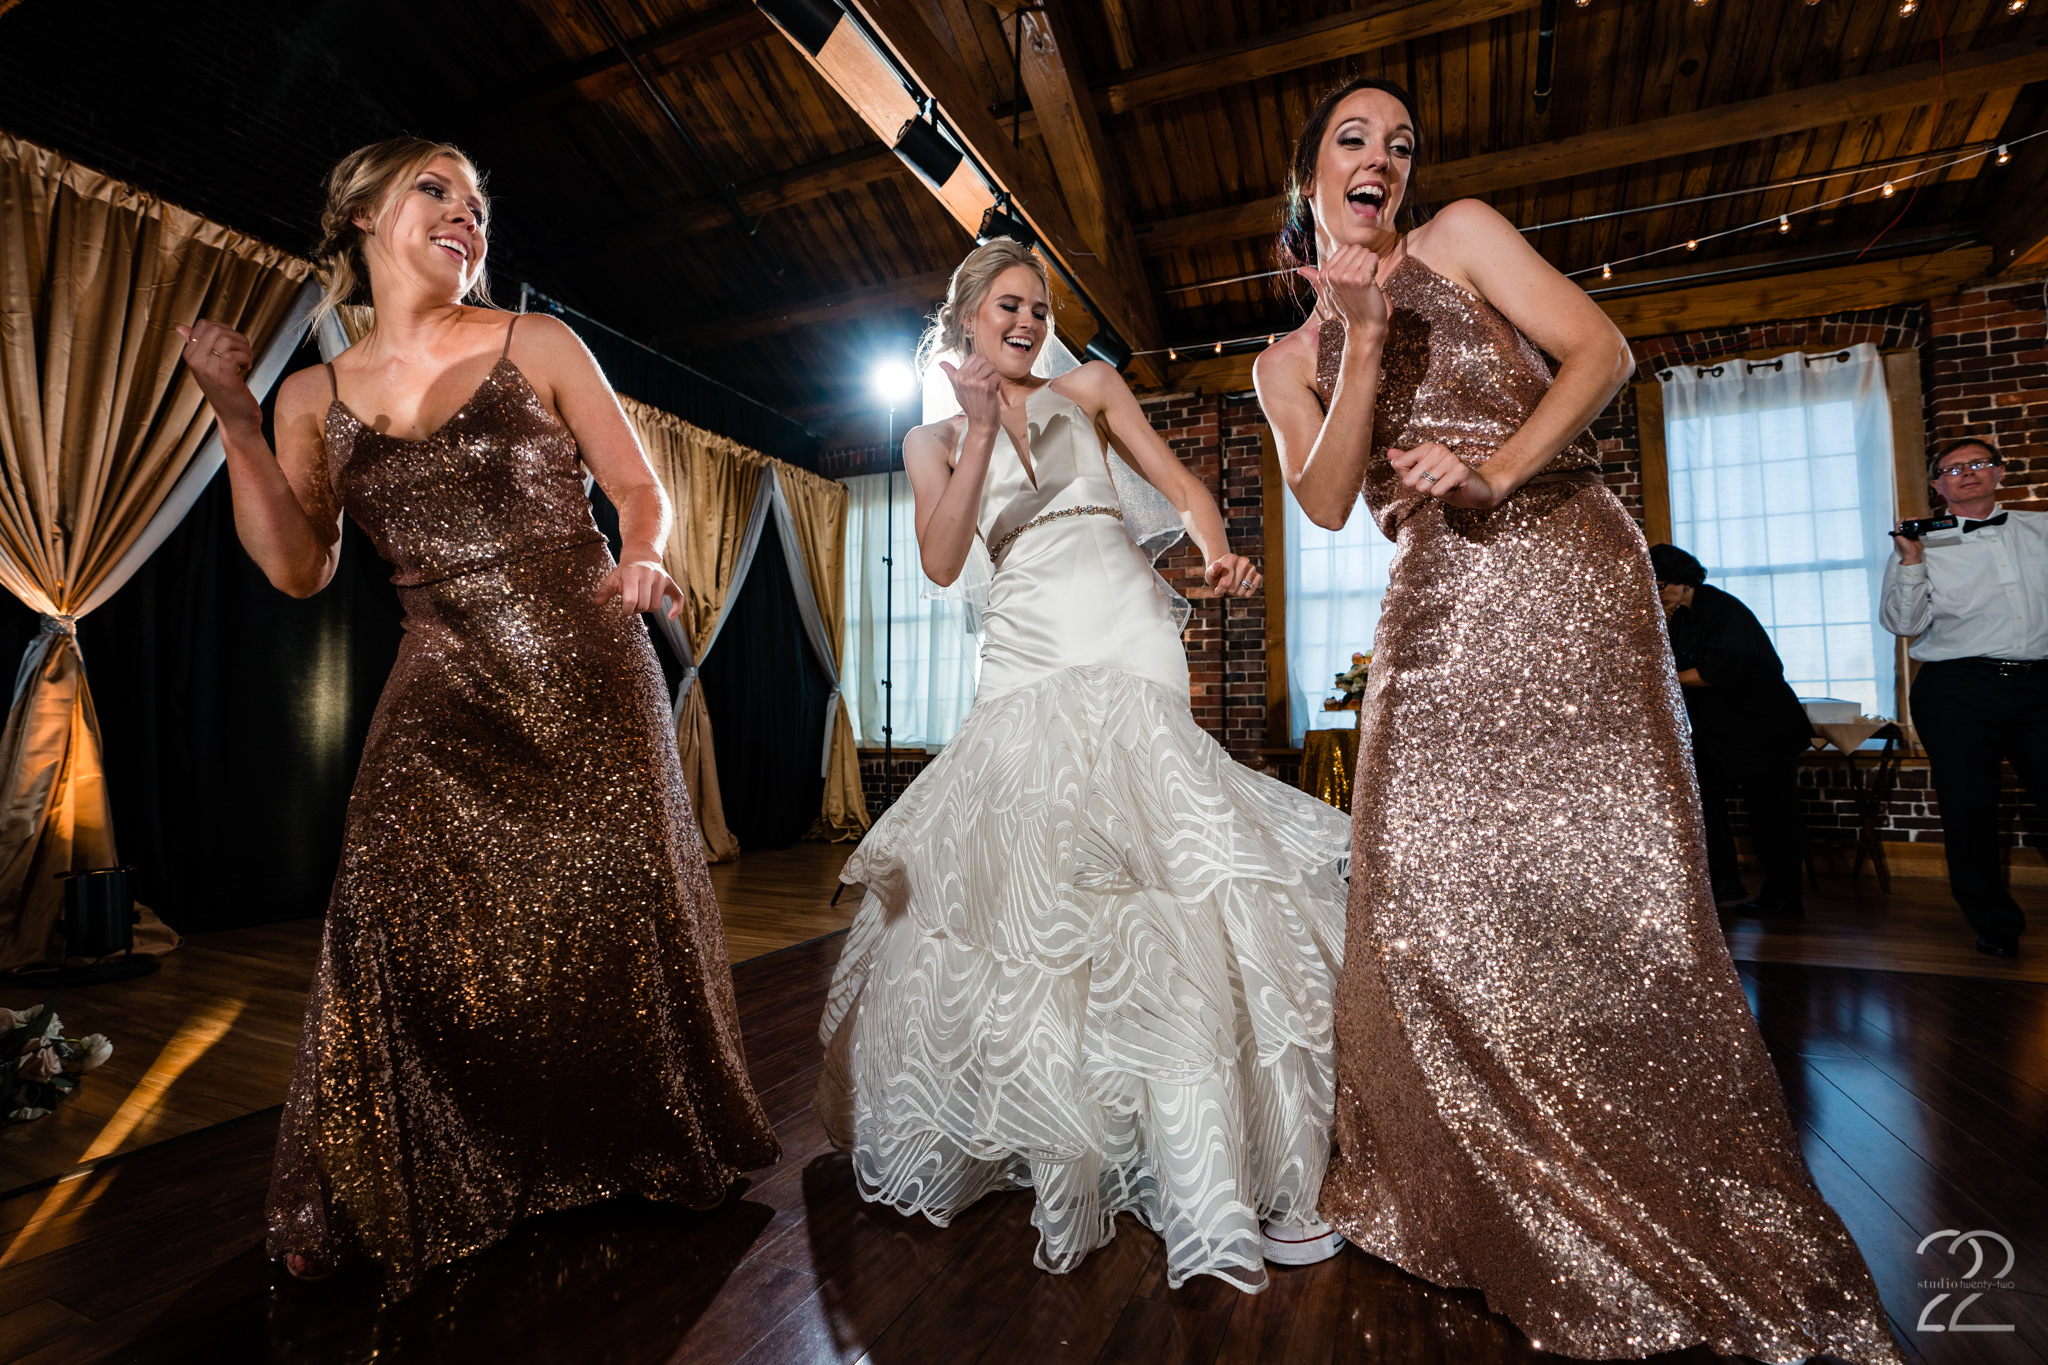  Receptions are one of the most fun things for us to shoot at a wedding. We love capturing everyone letting loose and having fun! Dillon and Corrie’s reception at Top of the Market Dayton was a blast! 